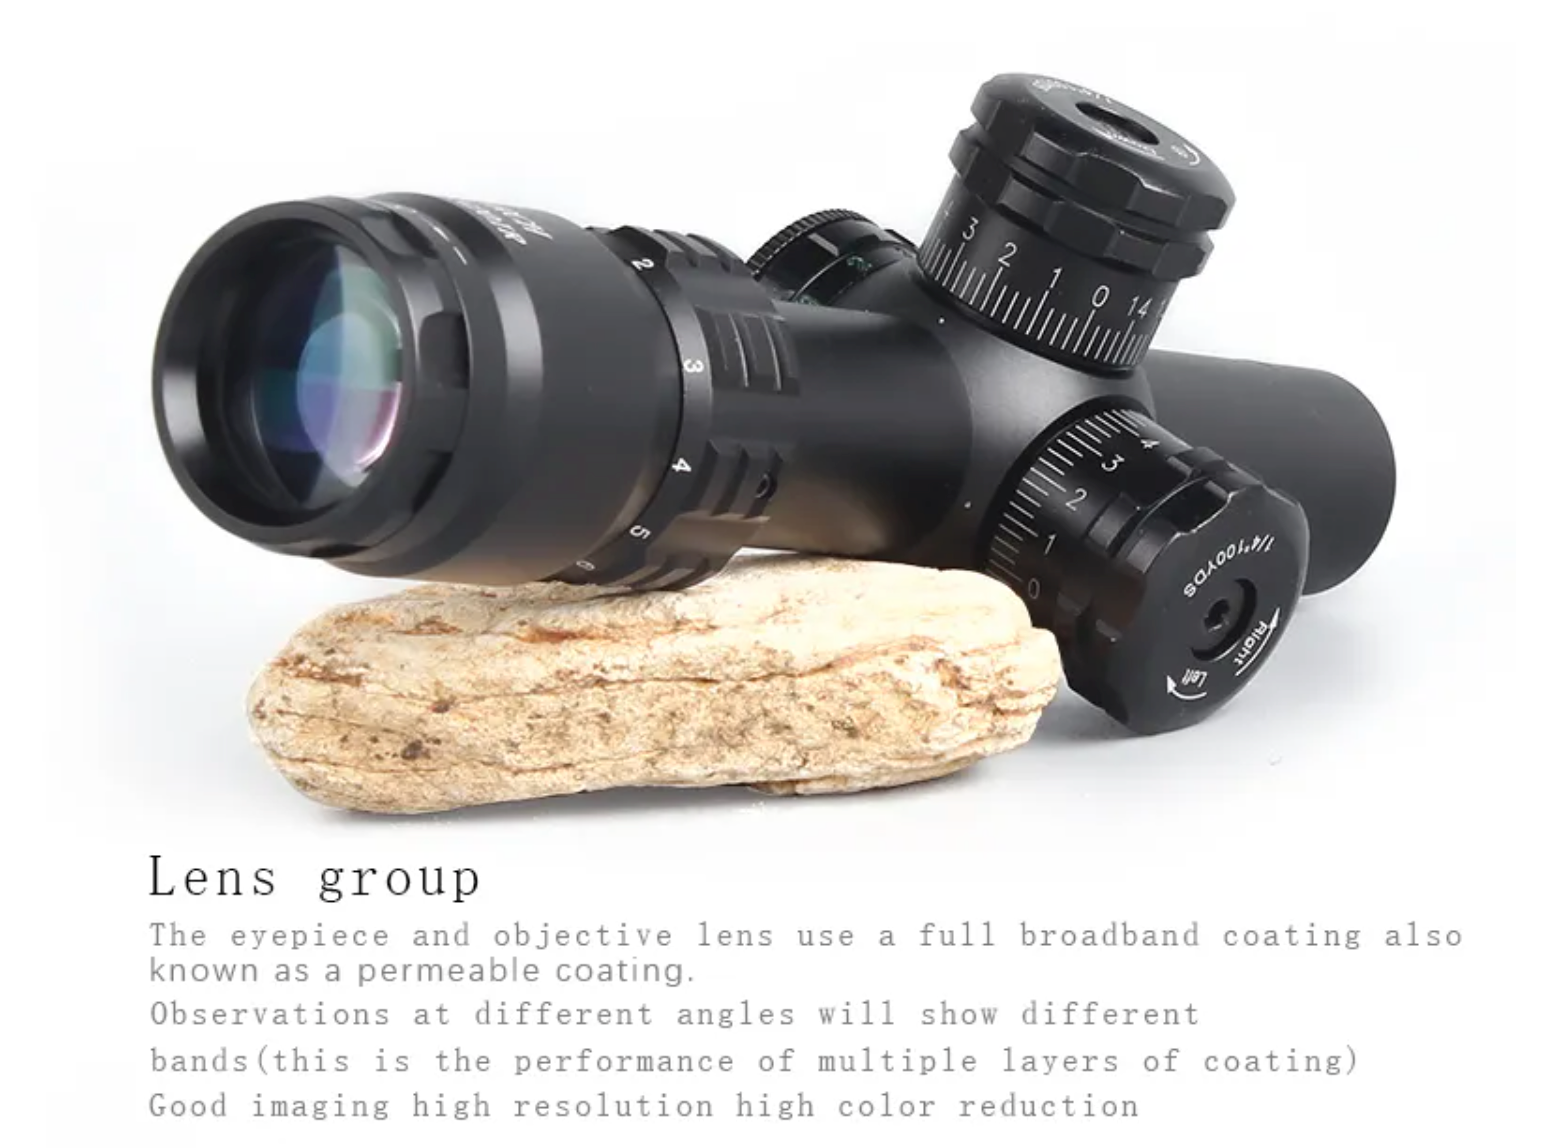 T-EAGLE  March AMG HD 2-8X20 IR Compact Scope